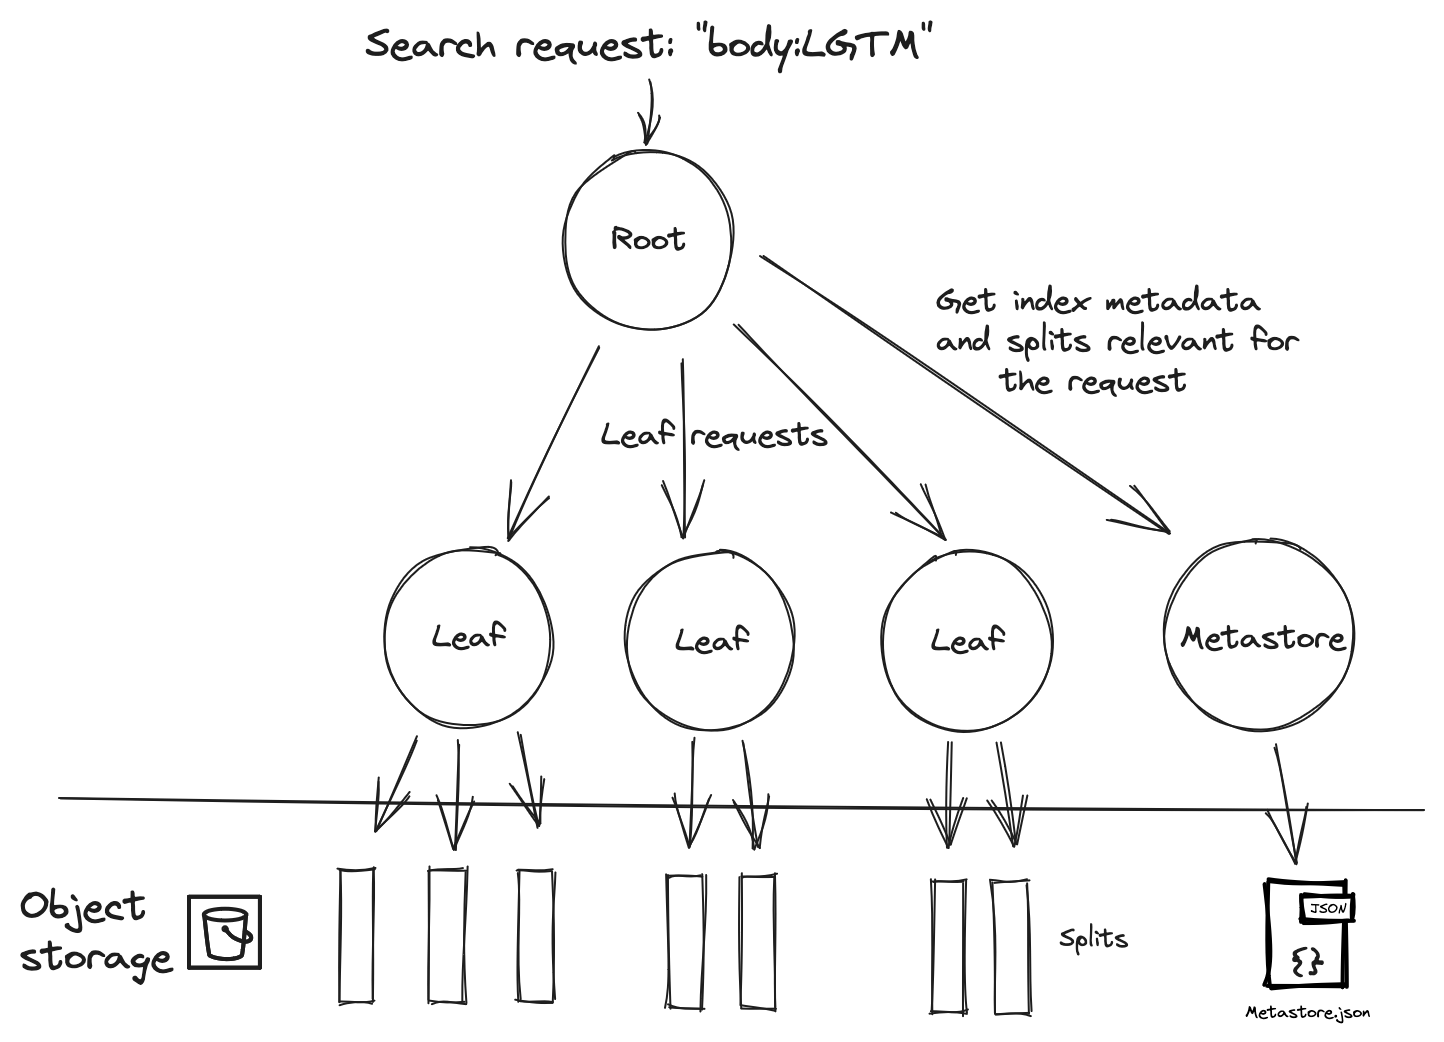 Distributed search